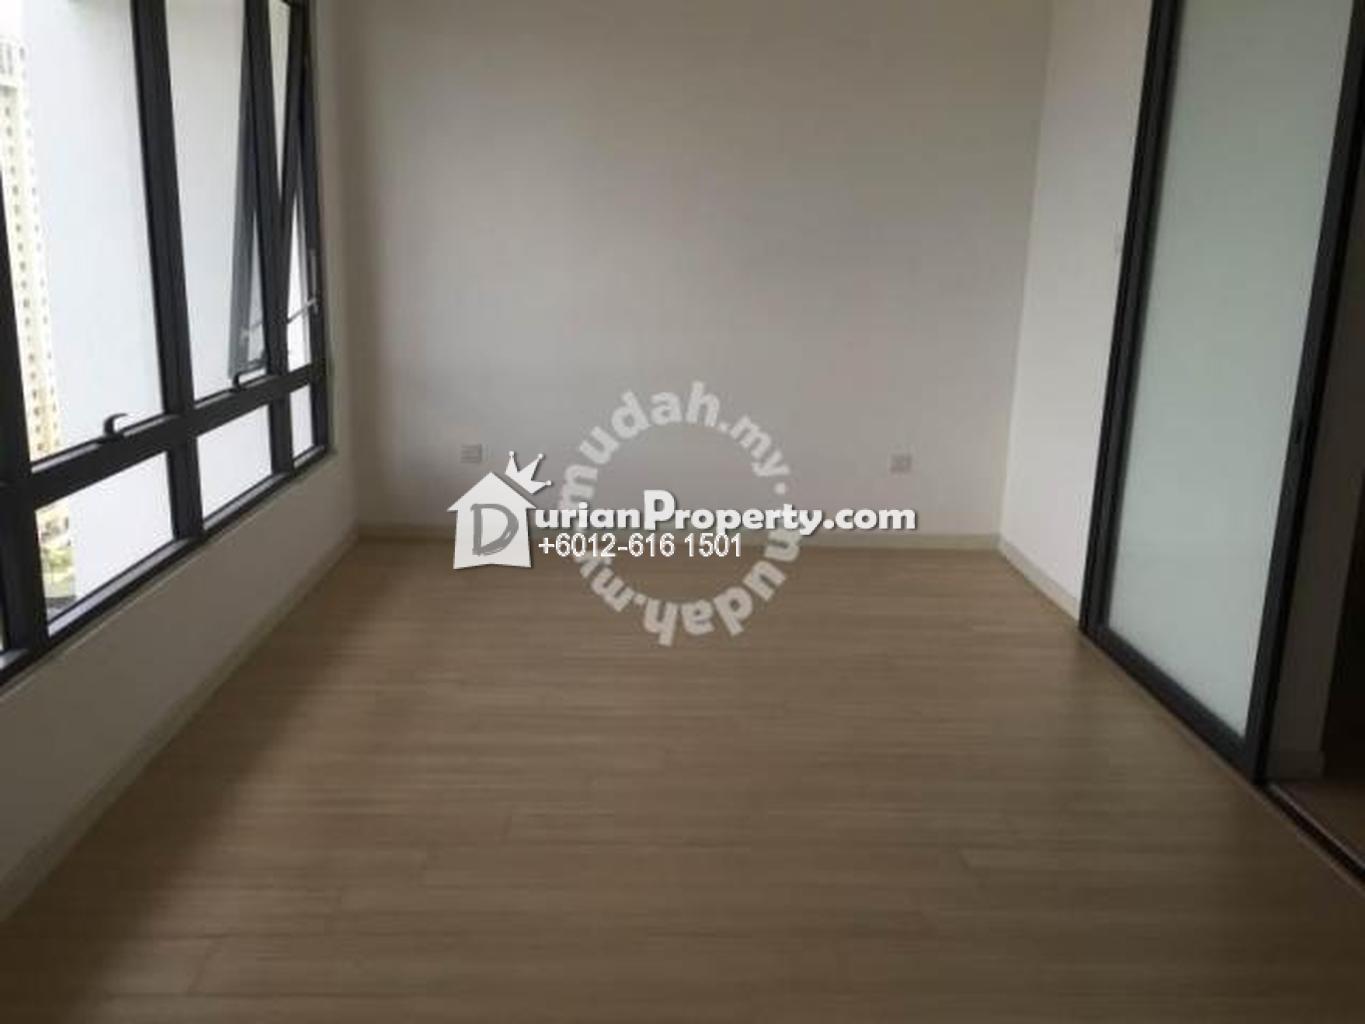 Condo For Rent At You One Usj For Rm 1 200 By Yh Chua Durianproperty